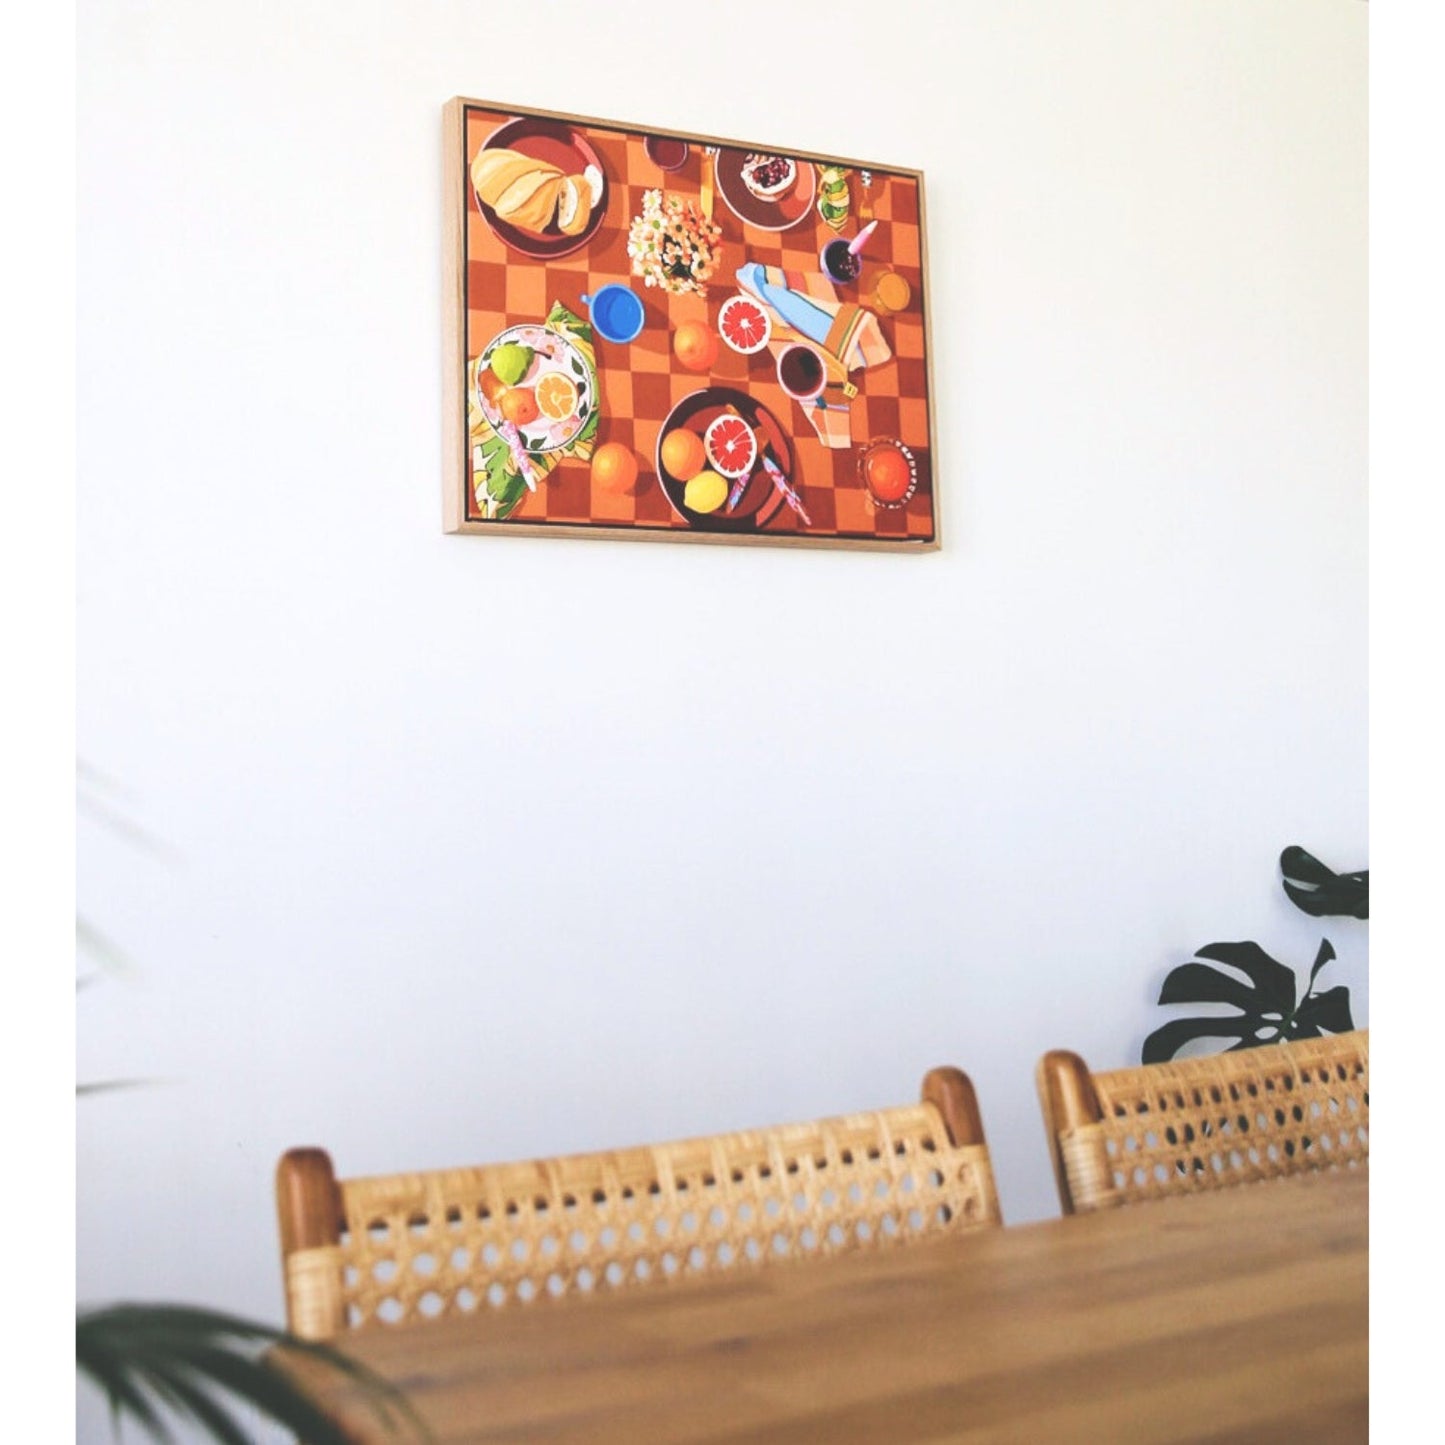 photo of a framed canvas print of a breakfast setup with oranges, lemons, tea towels, cutlery by kip and co, and flowers and cups on a chequered tablecloth background